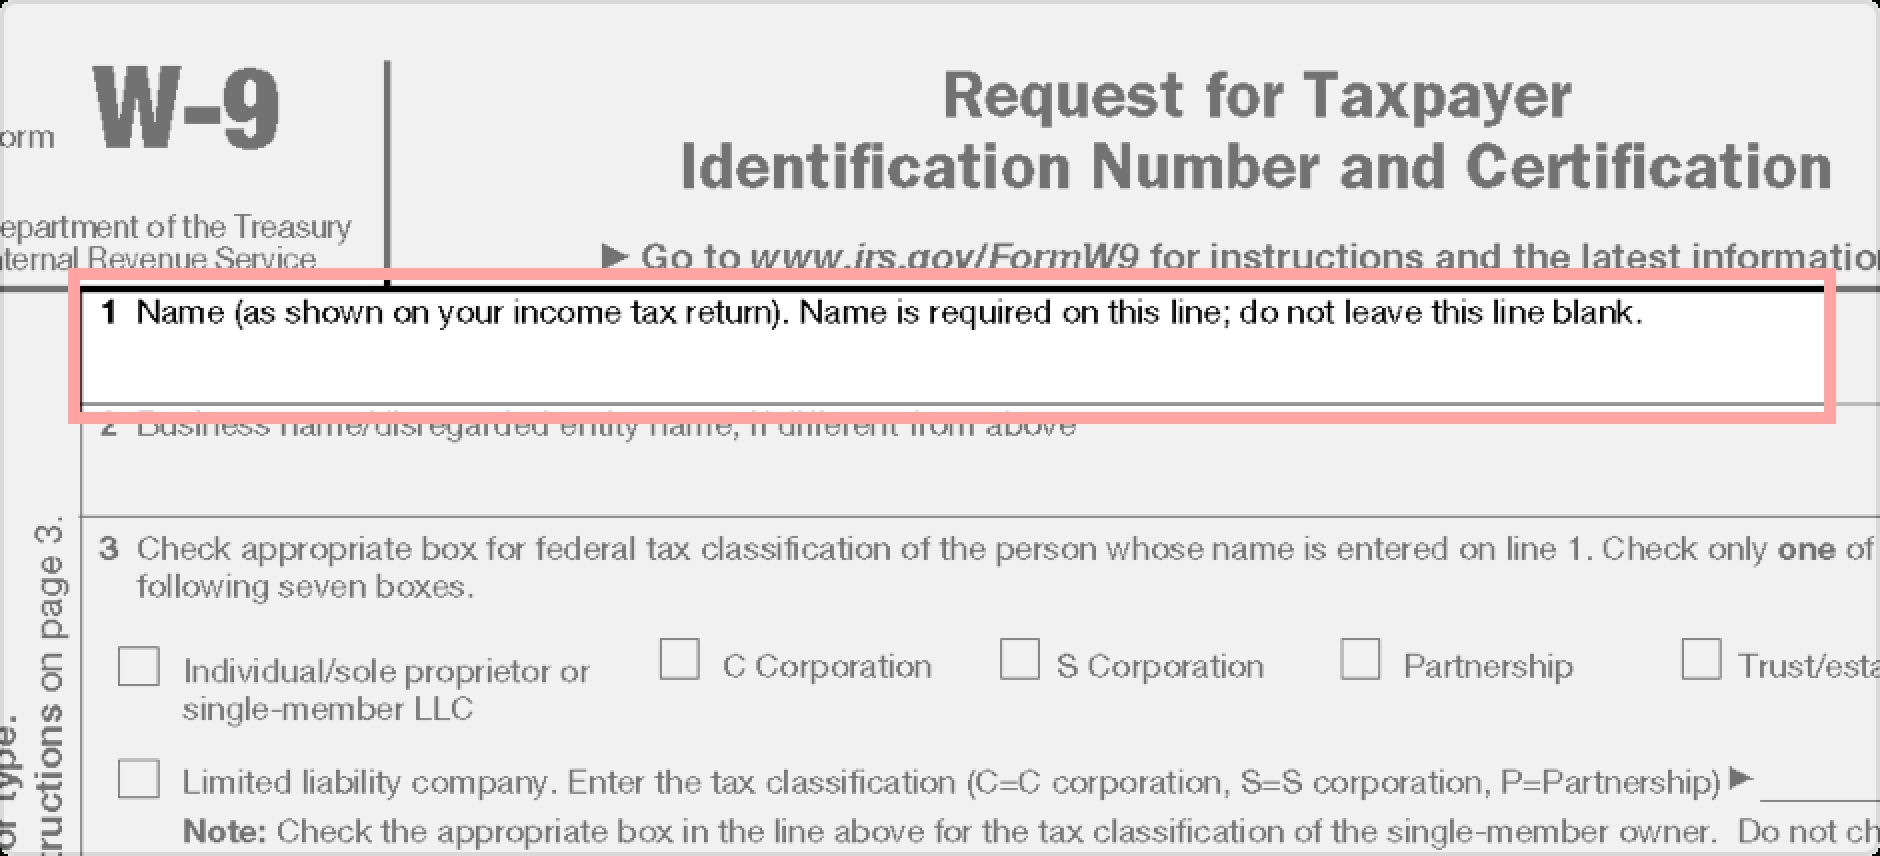 W-9 Form: Fillable, Printable, Download Free. 2020 Instructions-I Need To Print A 2021 W-9 Form